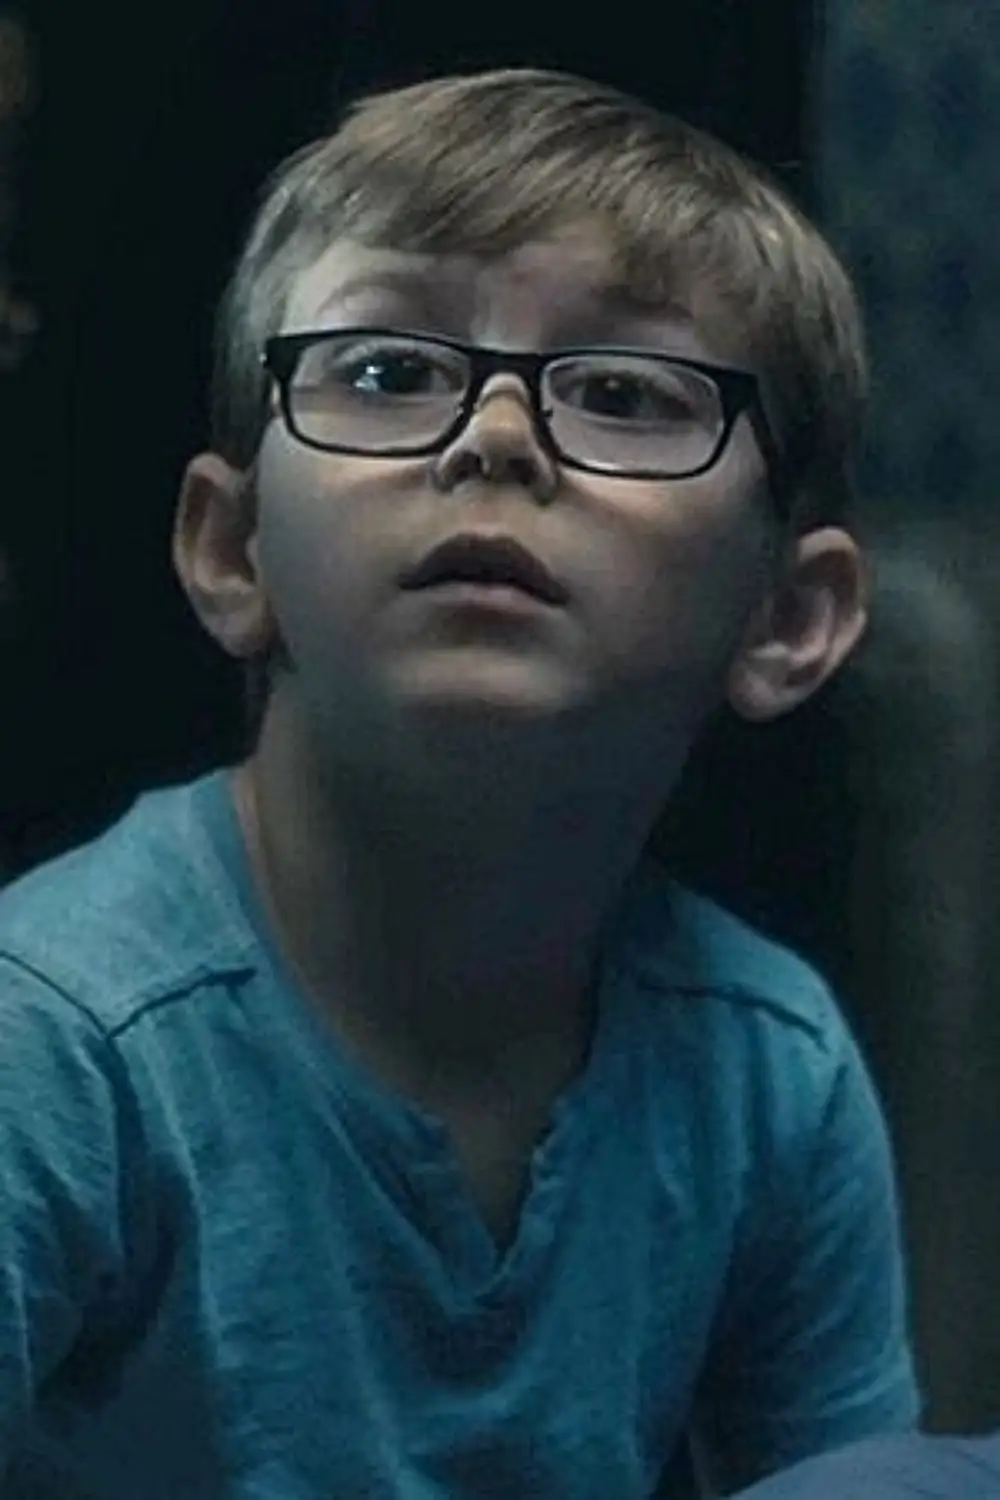 Young Luke (The Haunting of Hill House), Ator